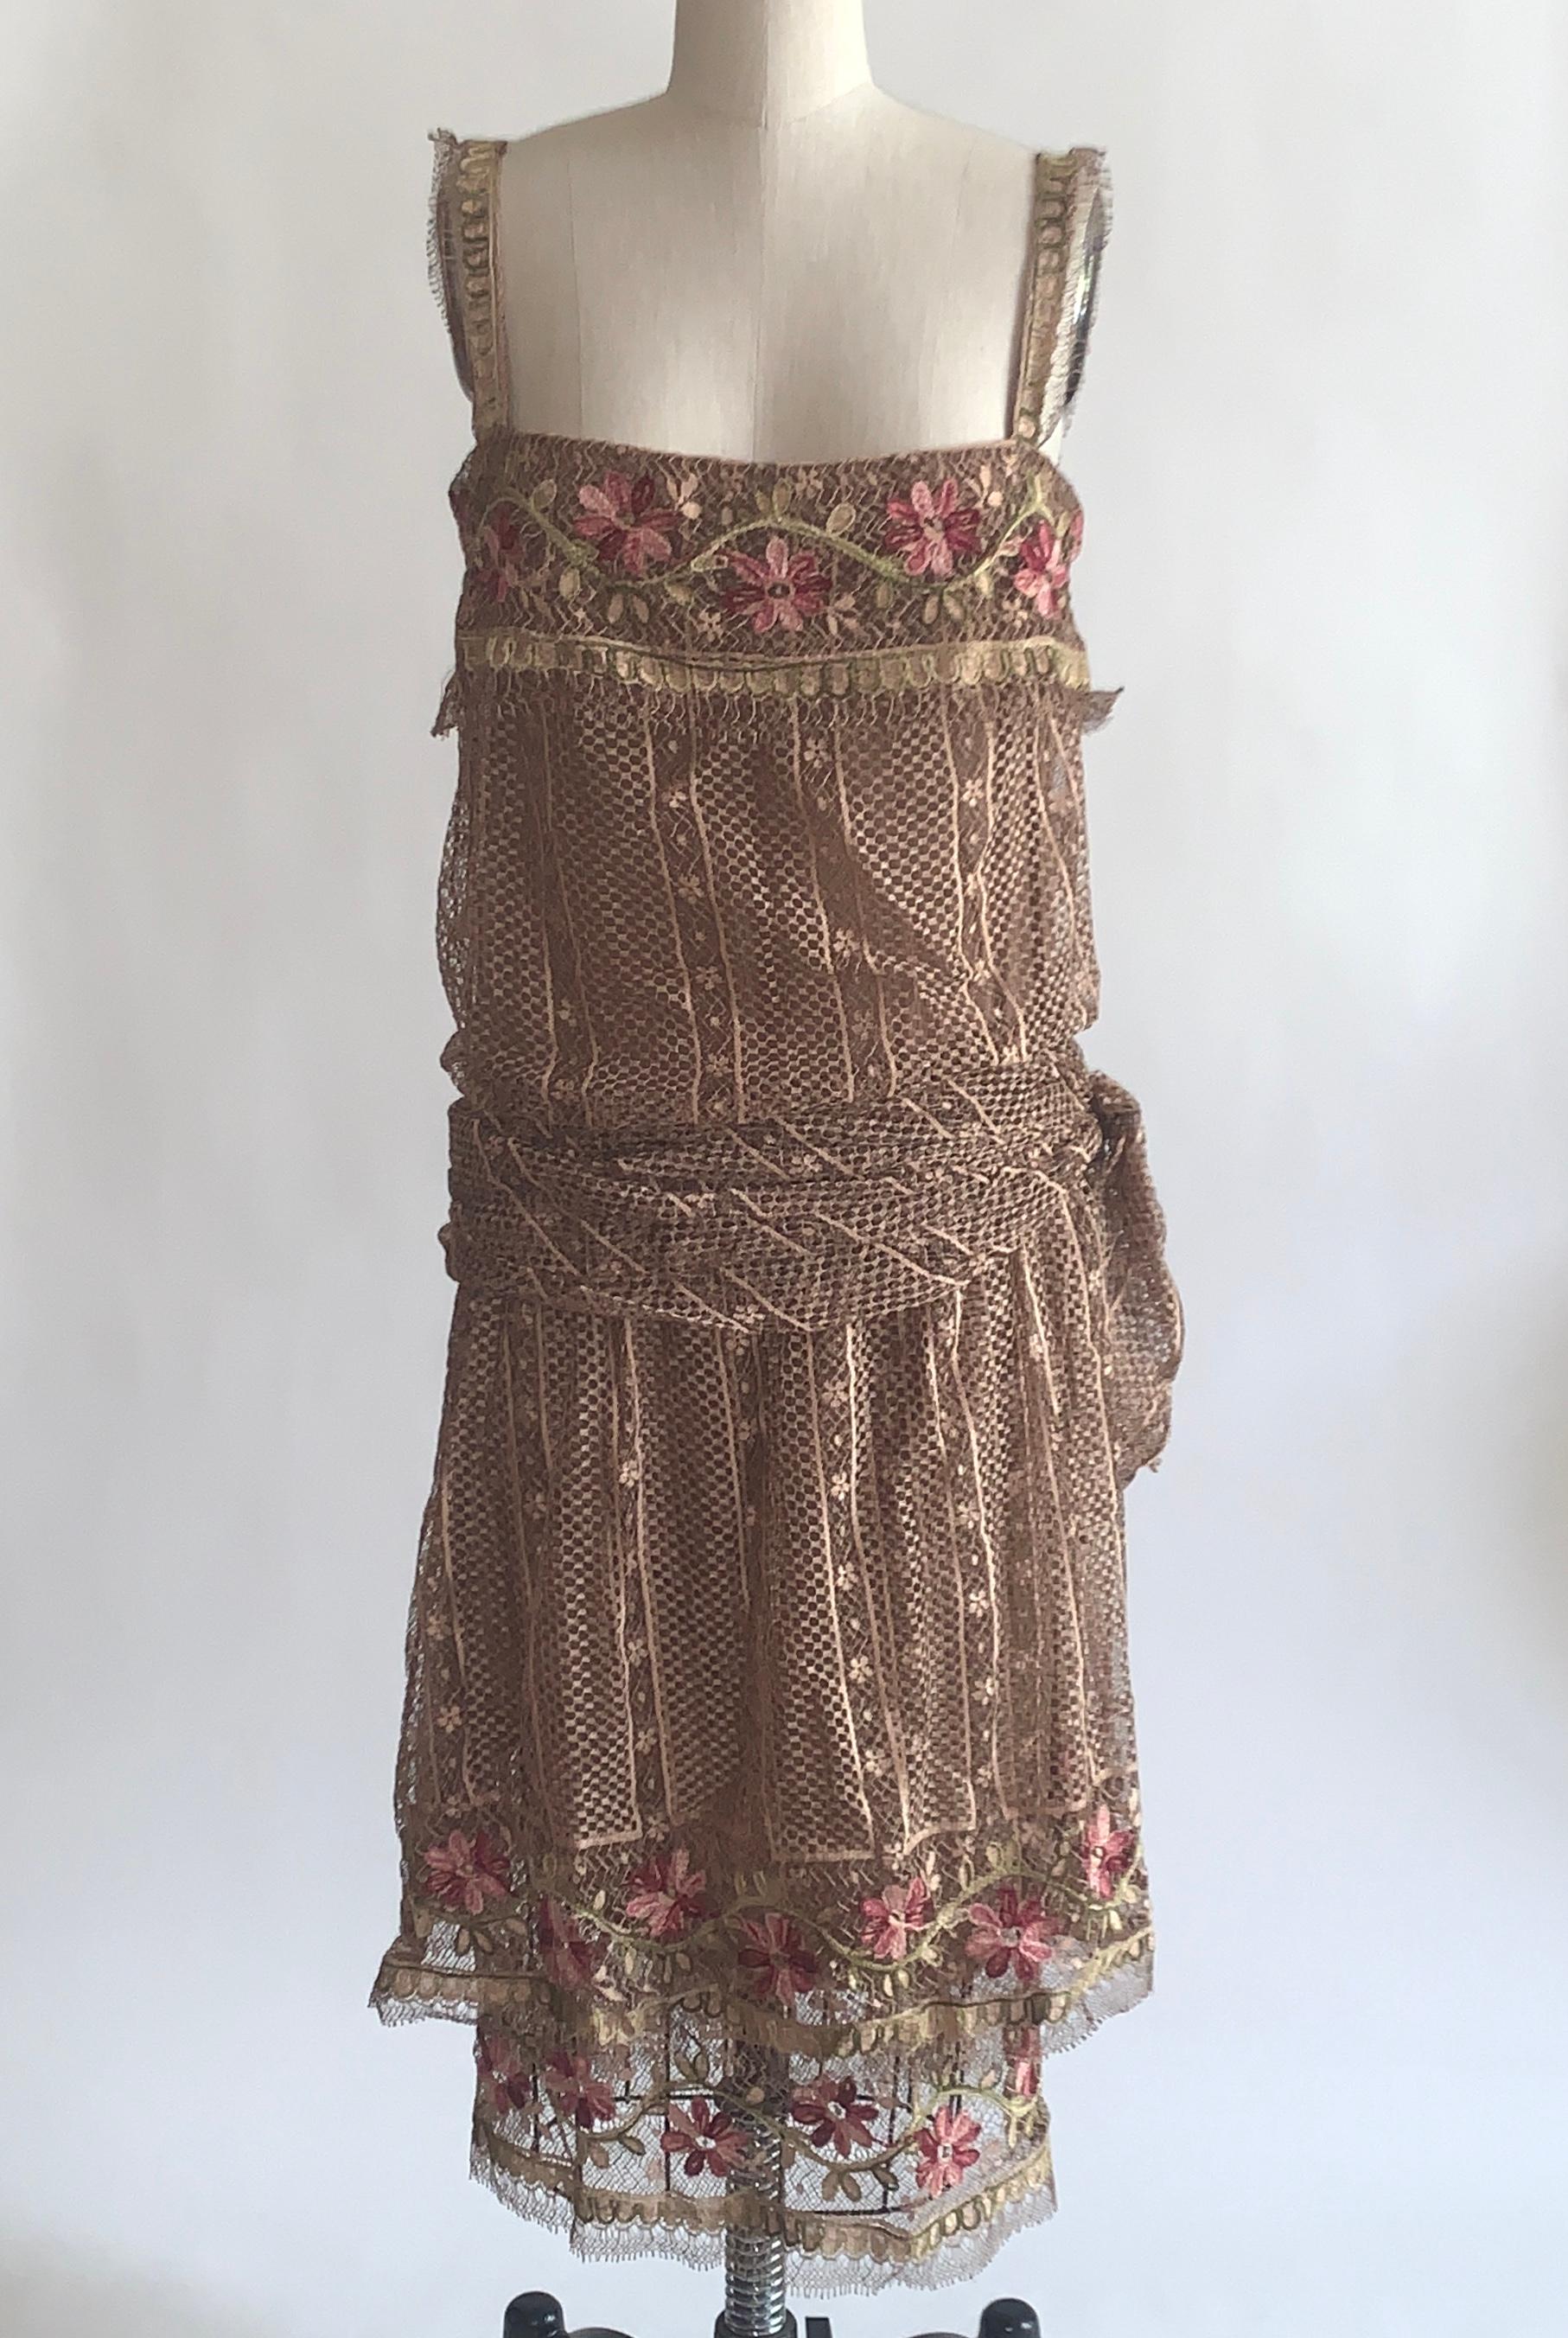 Louis Feraud 1970s haute couture light brown lace dress in a 1920s style drop waist silhouette. Amazing embroidered lace and hand finished seam allowances. Small buttons conceal a back zip.

Lace exterior, fully lined in what feels like silk.

Made